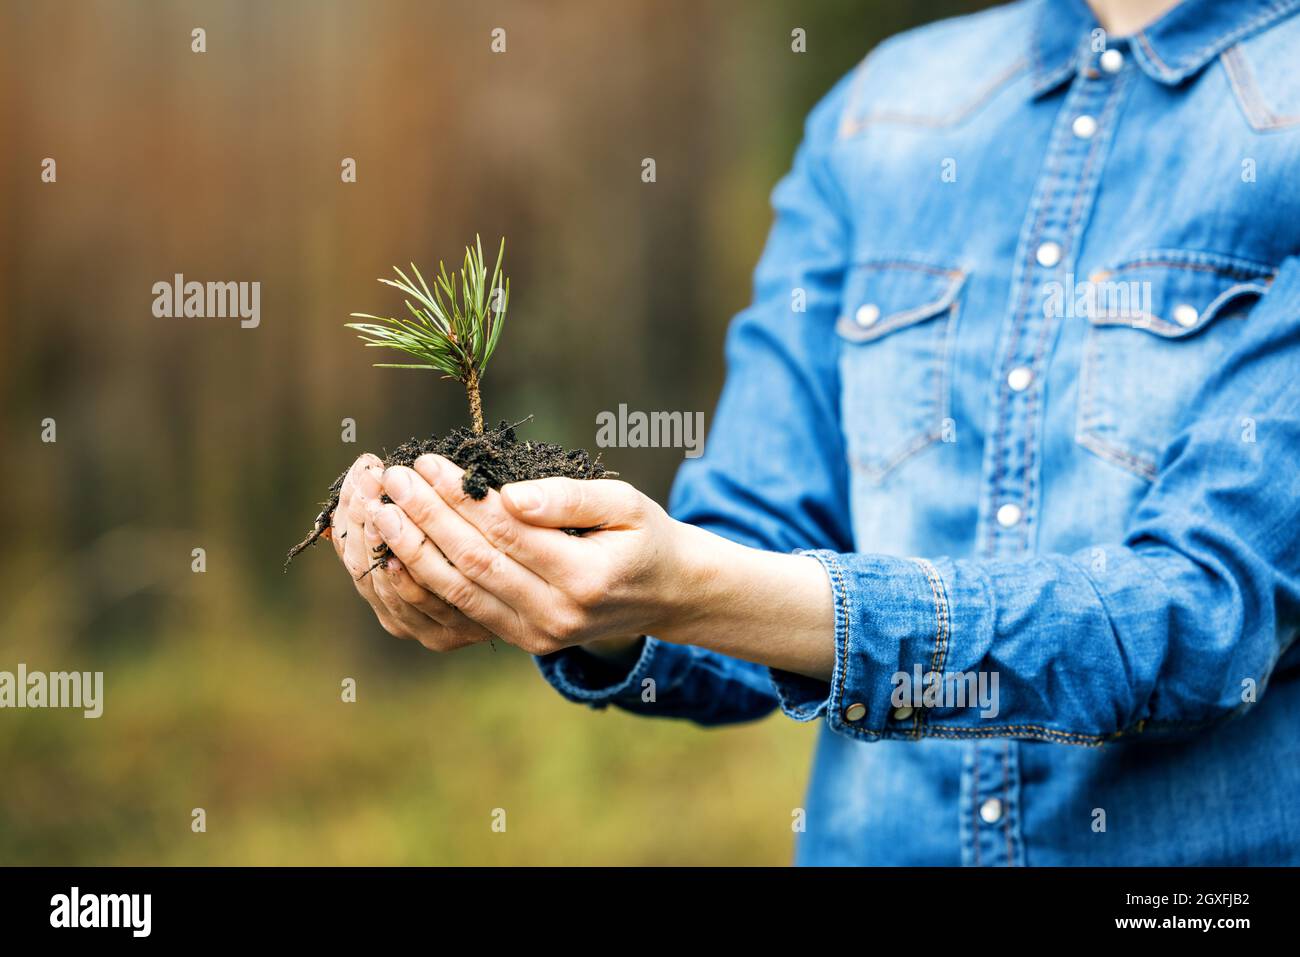 plant a forest and forestry concept - hands holding pine tree seedling. renewable resource Stock Photo